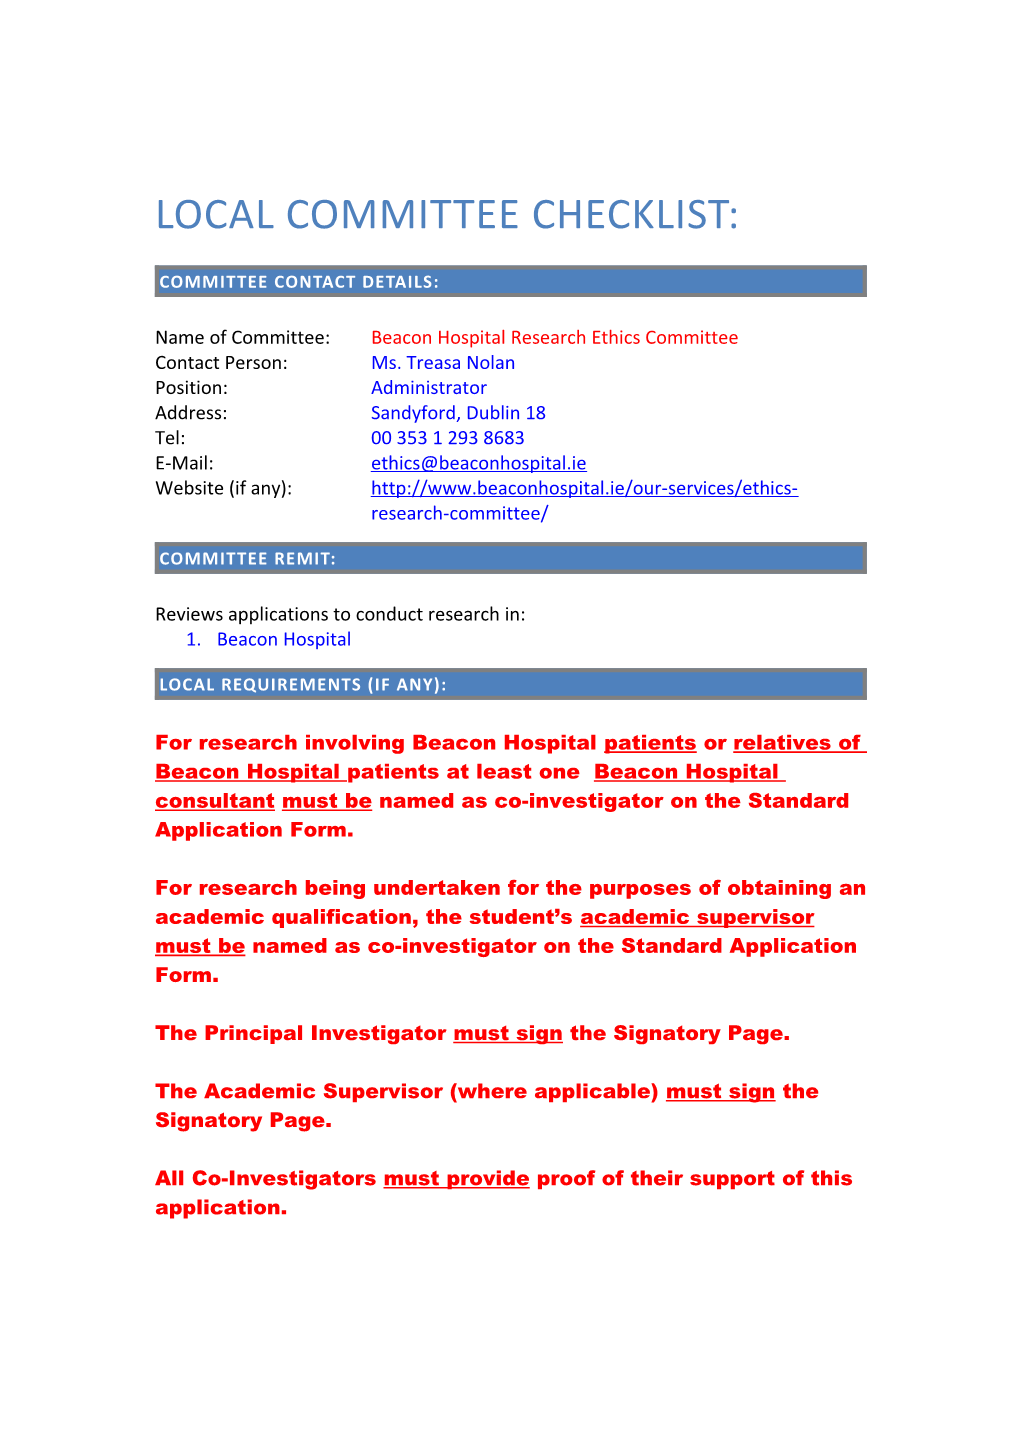 Local Committee Checklist